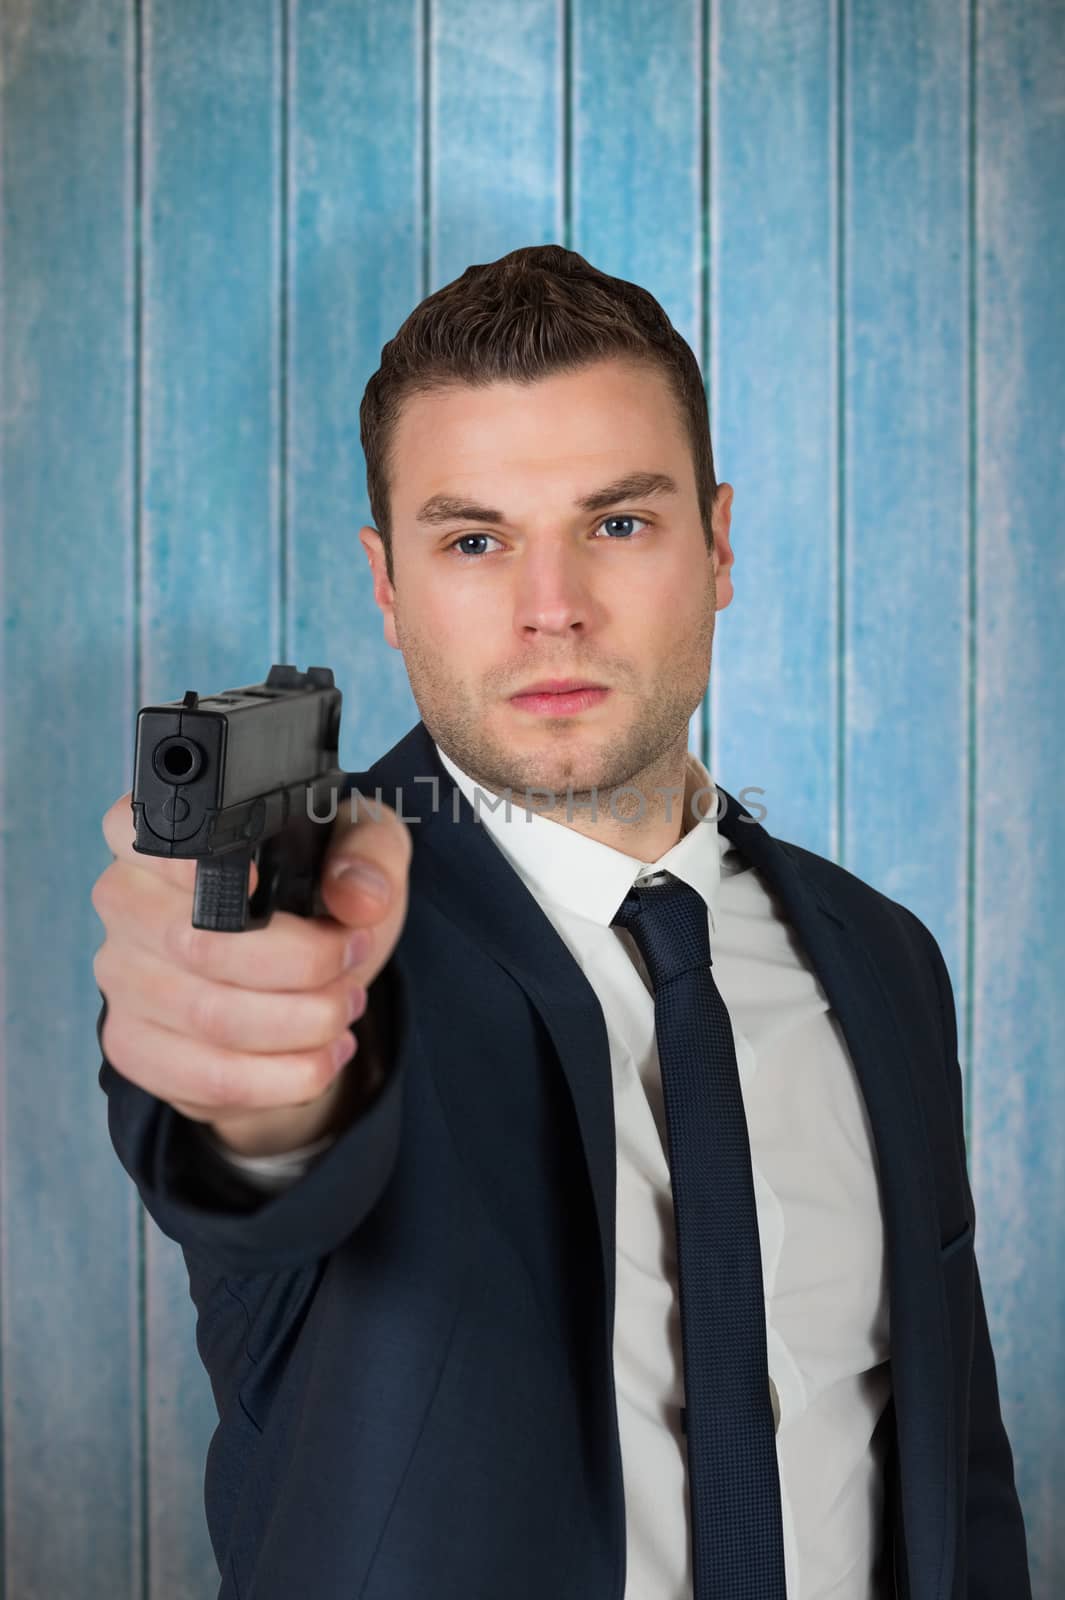 Serious businessman pointing a gun against wooden planks